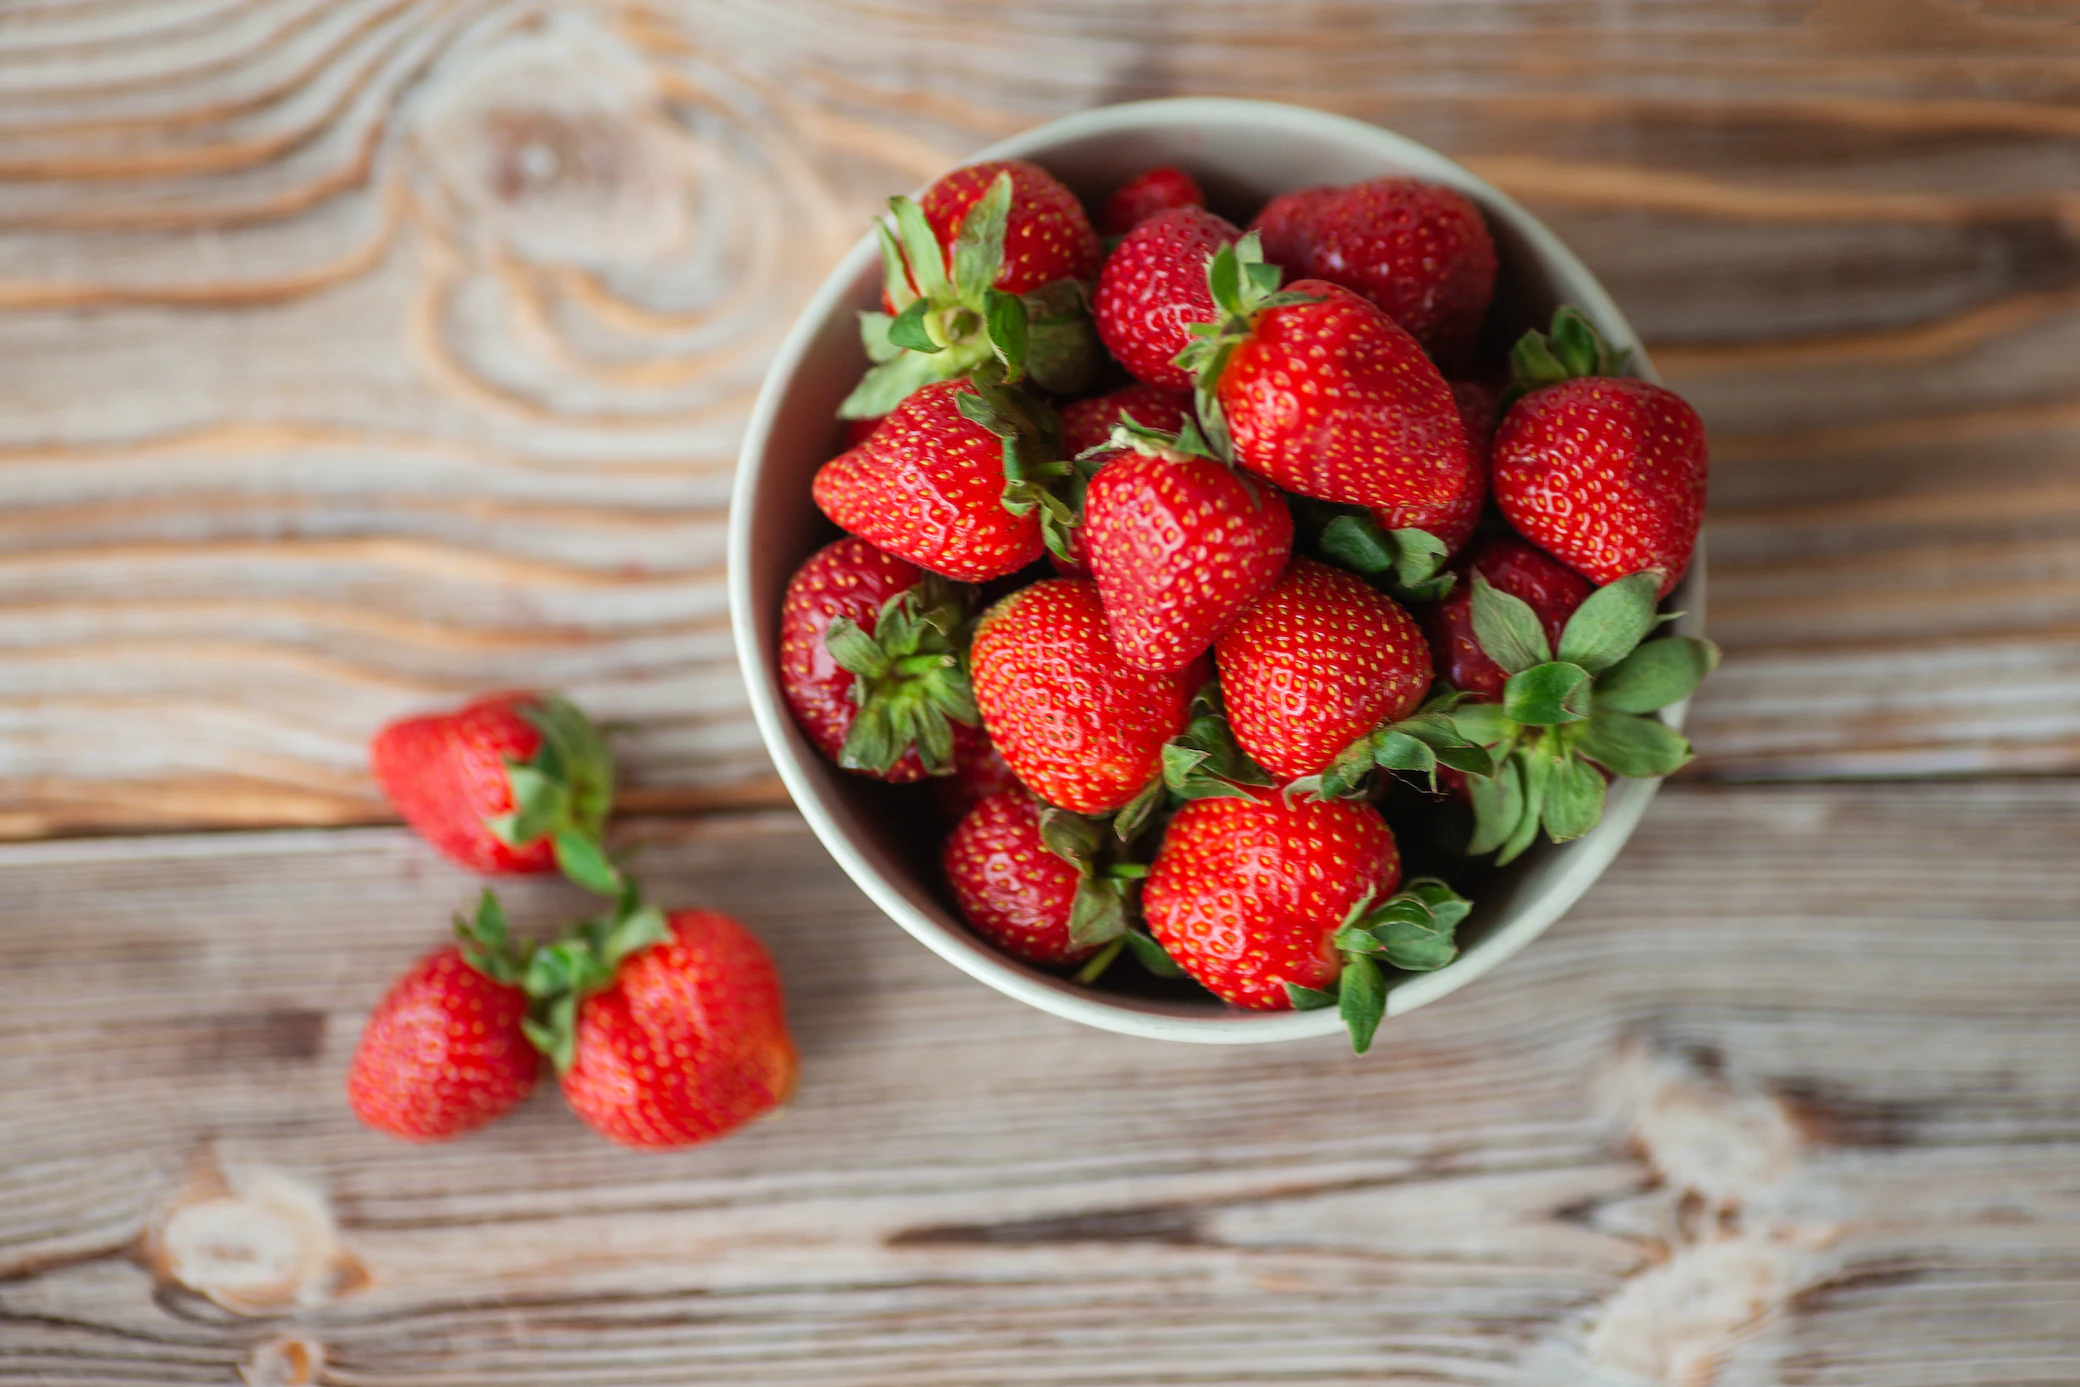 Strawberries can protect against Alzheimer's disease, according to study - FITBOOK